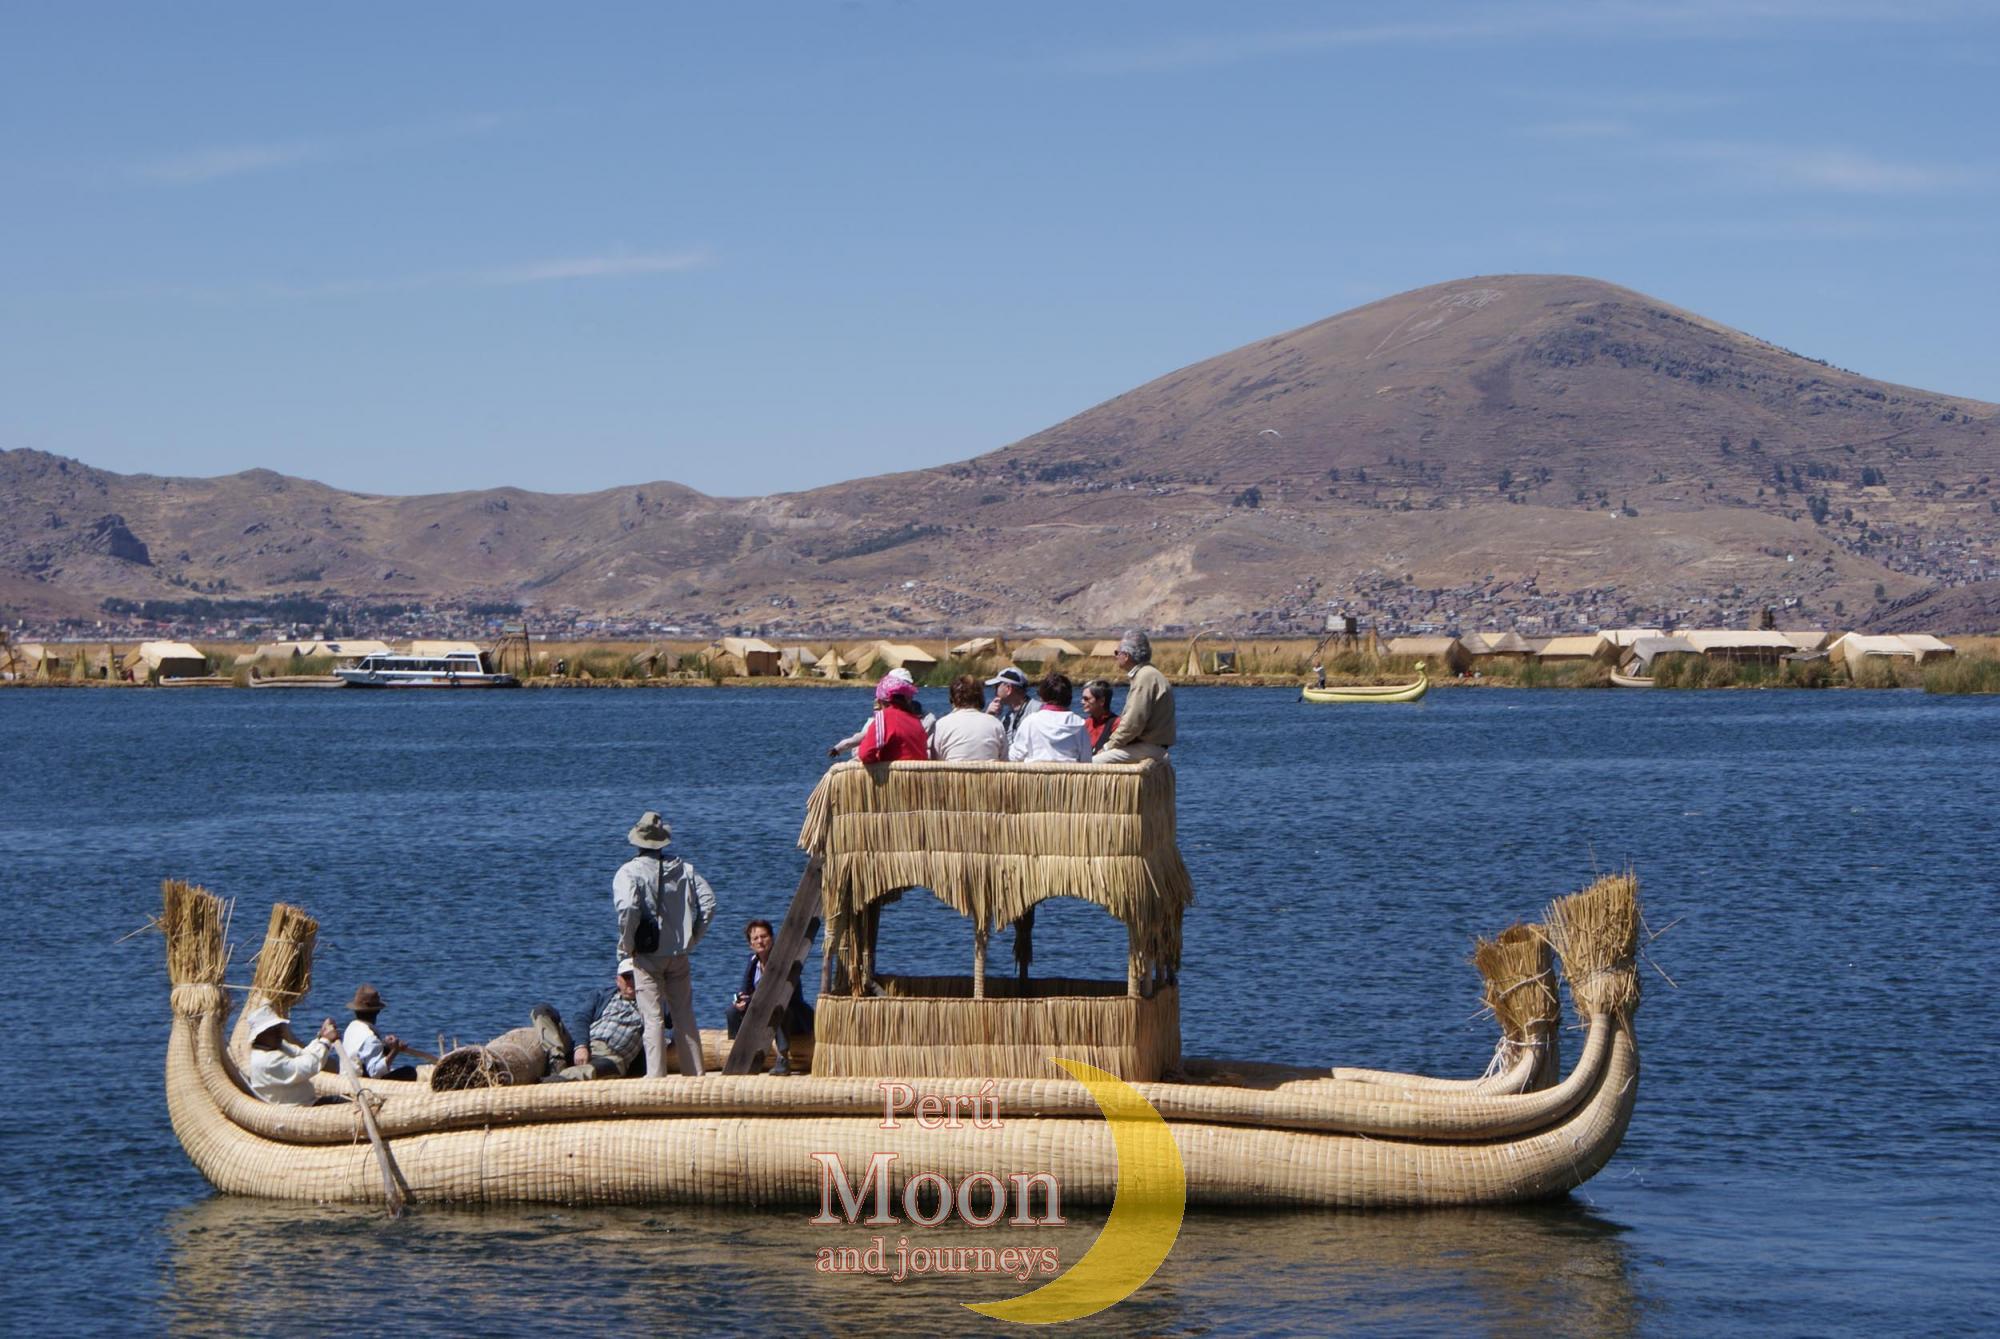 Traditional boat of Uros